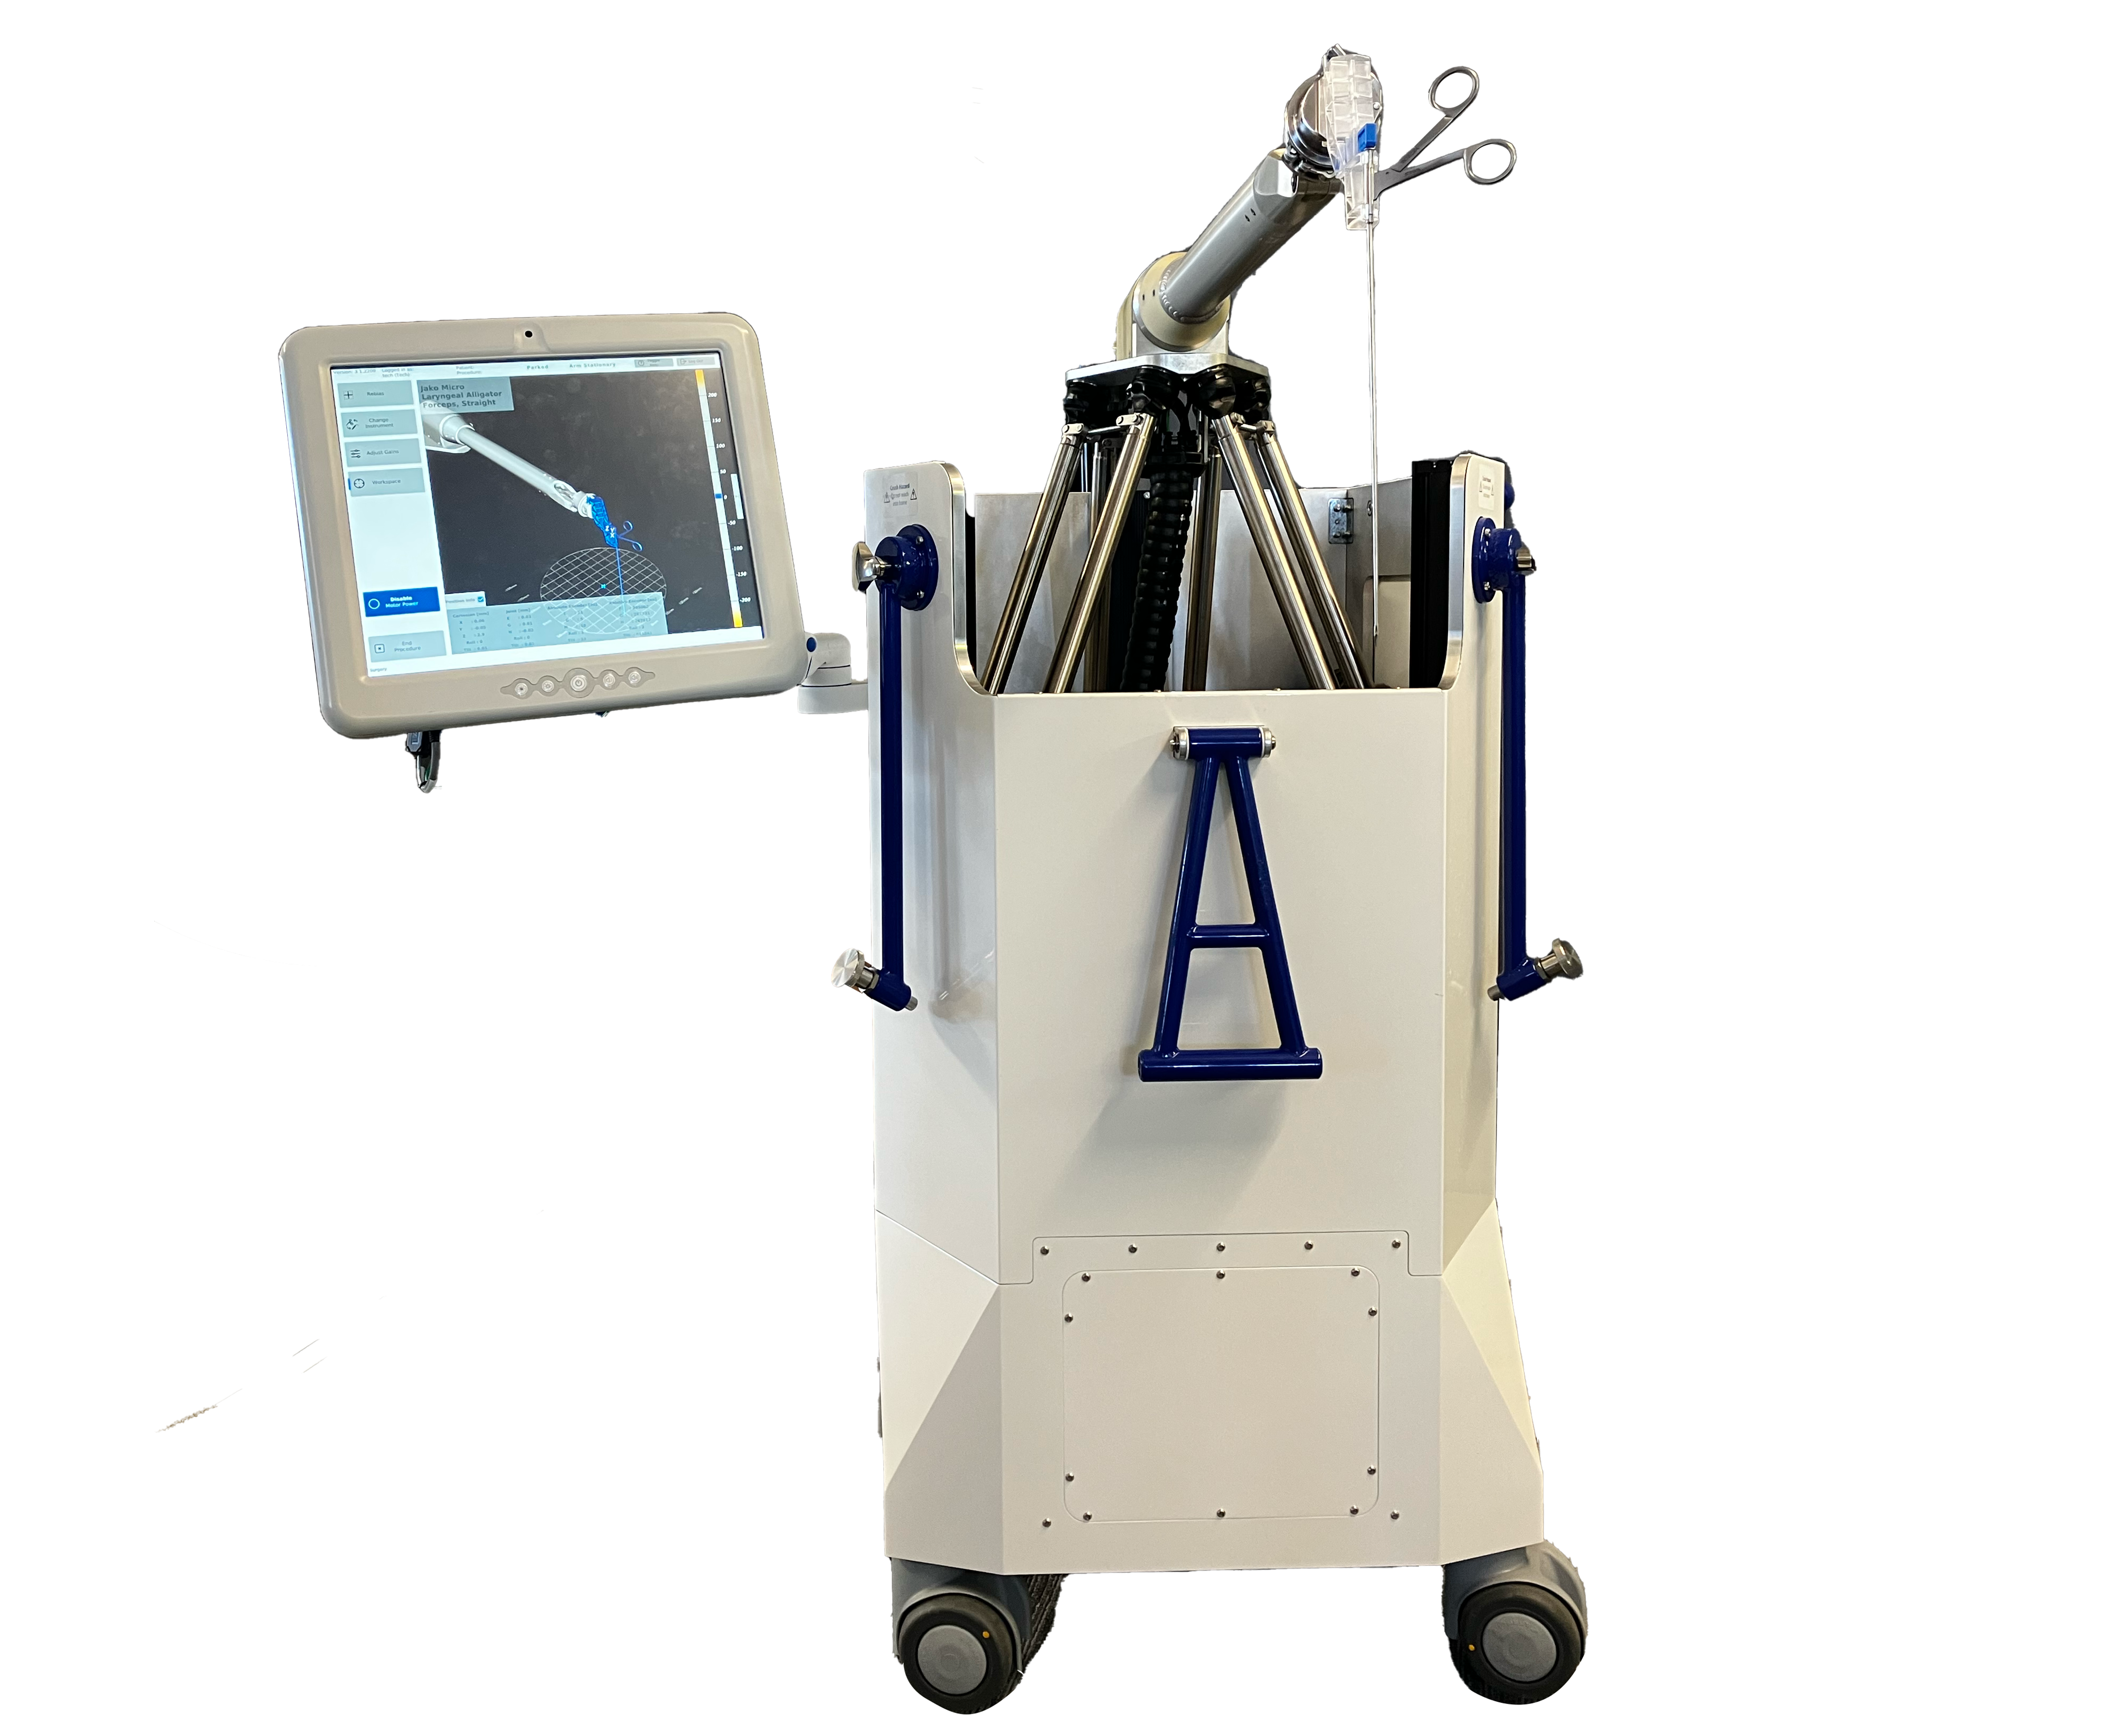 Galen Robotics looks to assist ENT surgeons with new bot and $15M round Tausi Insider Team